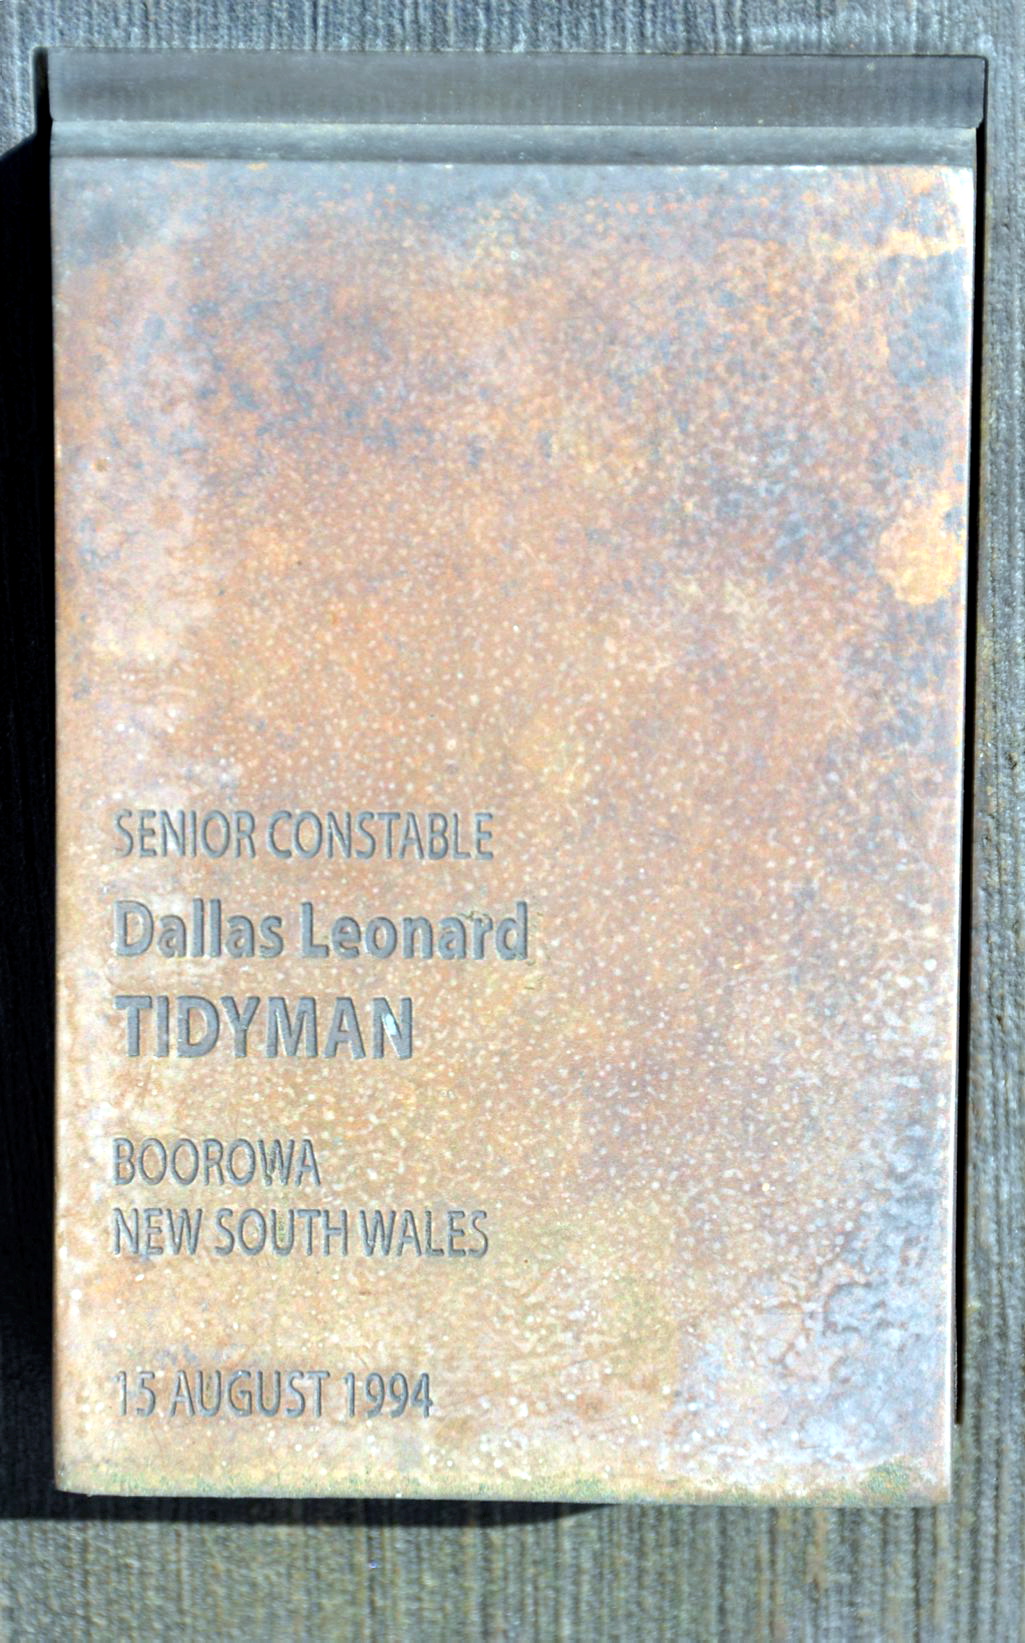 Dallas Leonard TIDYMAN memorial touch plate at Canberra Wall of Remembrance